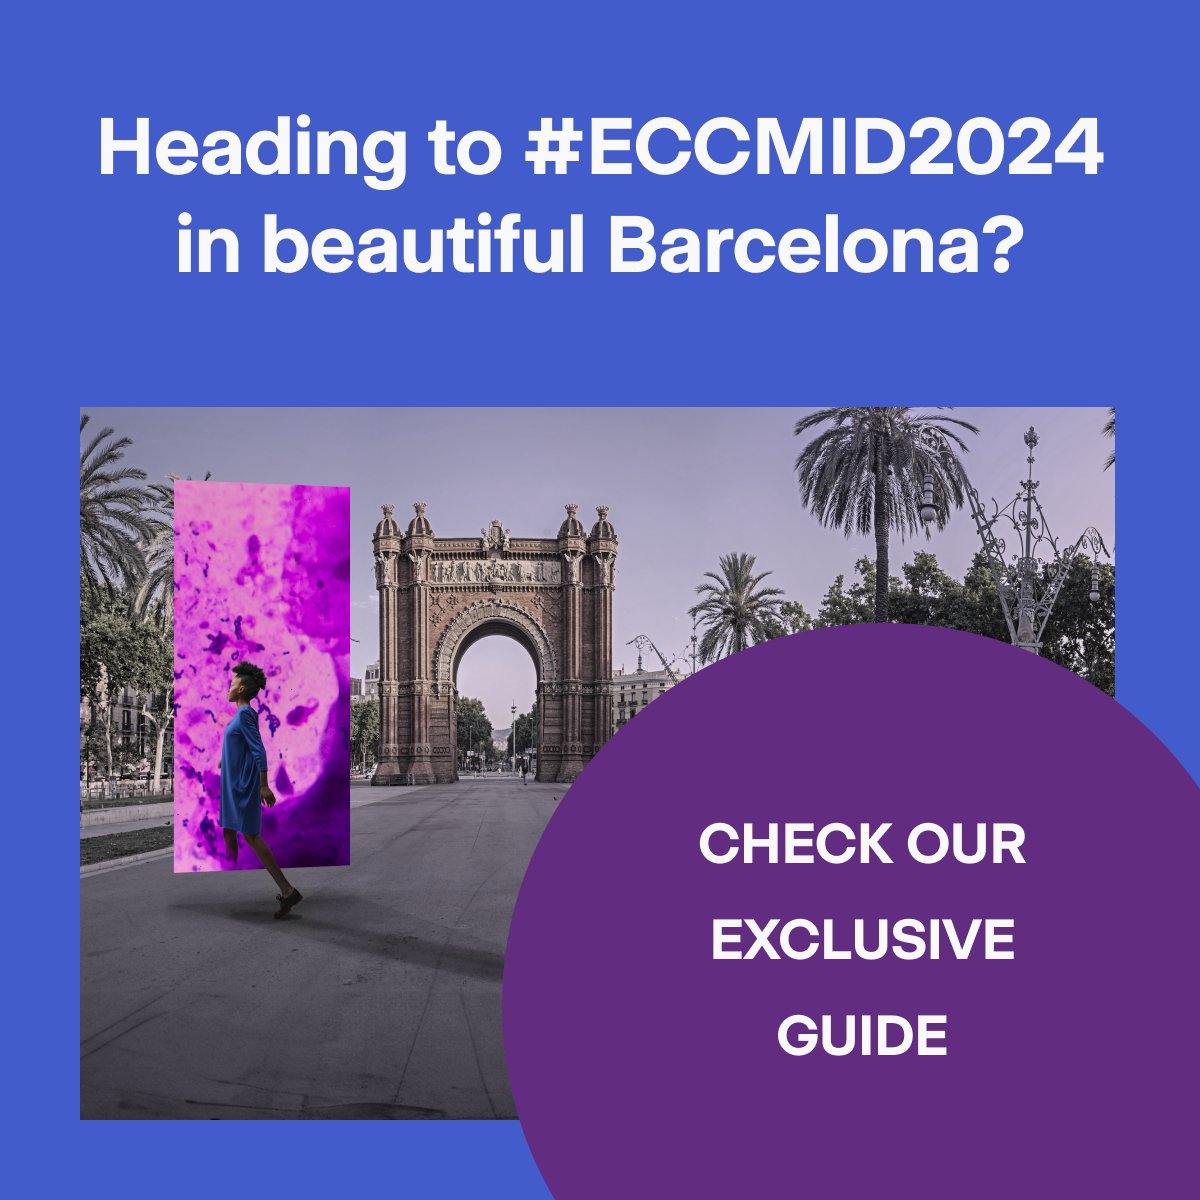 🌐 Heading to #ECCMID2024 in beautiful Barcelona? Make sure to plan ahead for a more worry-free congress experience! From navigating the venue to exploring the city, we've got you covered! Check our exclusive guide: eccmid.org/congress-infor…